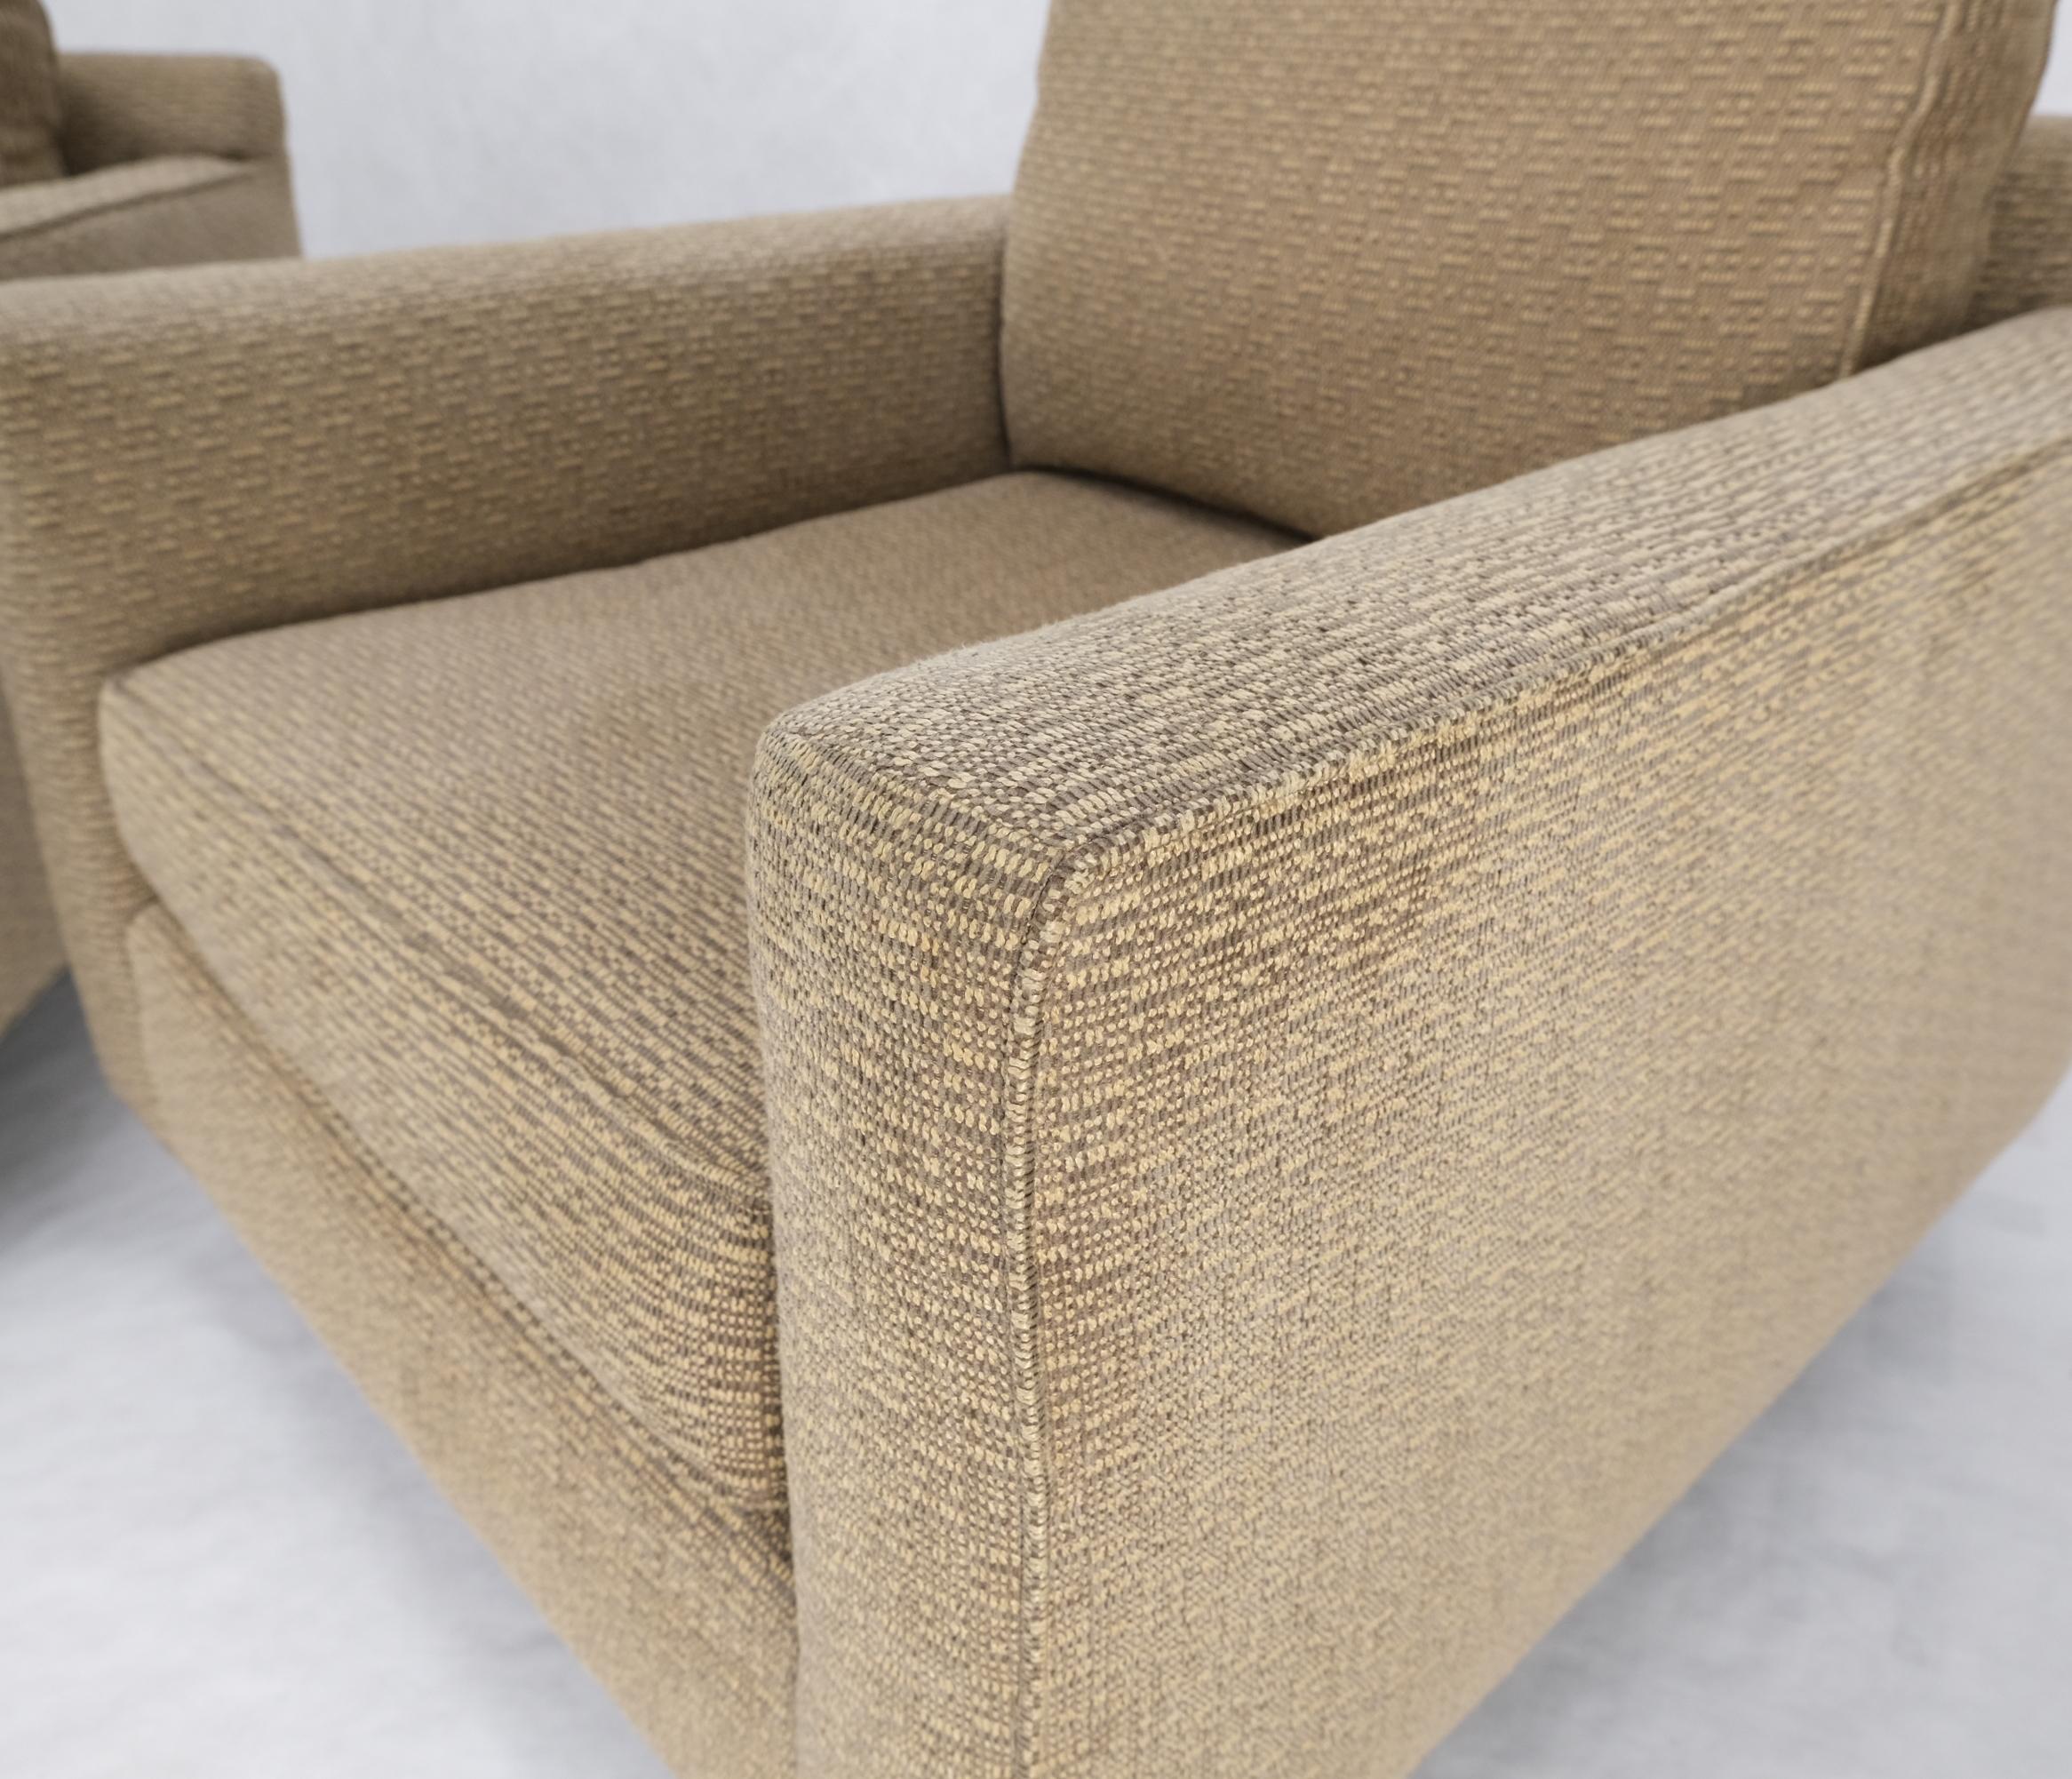 20th Century Pair Deep Seat Oatmeal Fabric Upholstery Contemporary Lounge Chair on Dowel Legs For Sale